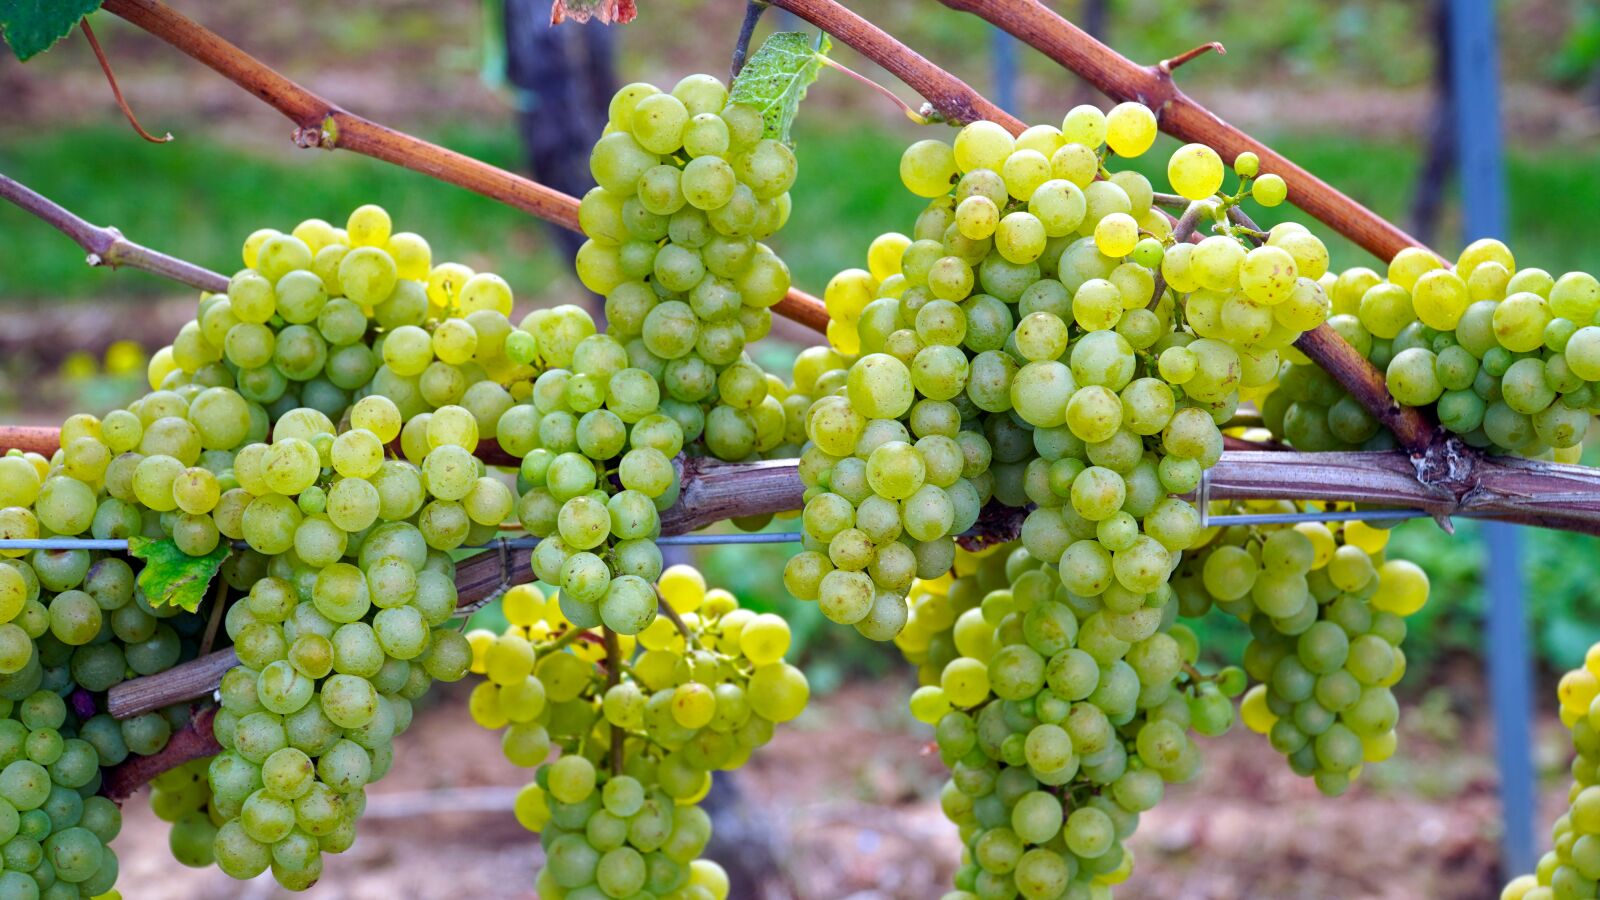 Sony a6400 sample photo. Grapes, green grapes, grapevine photography